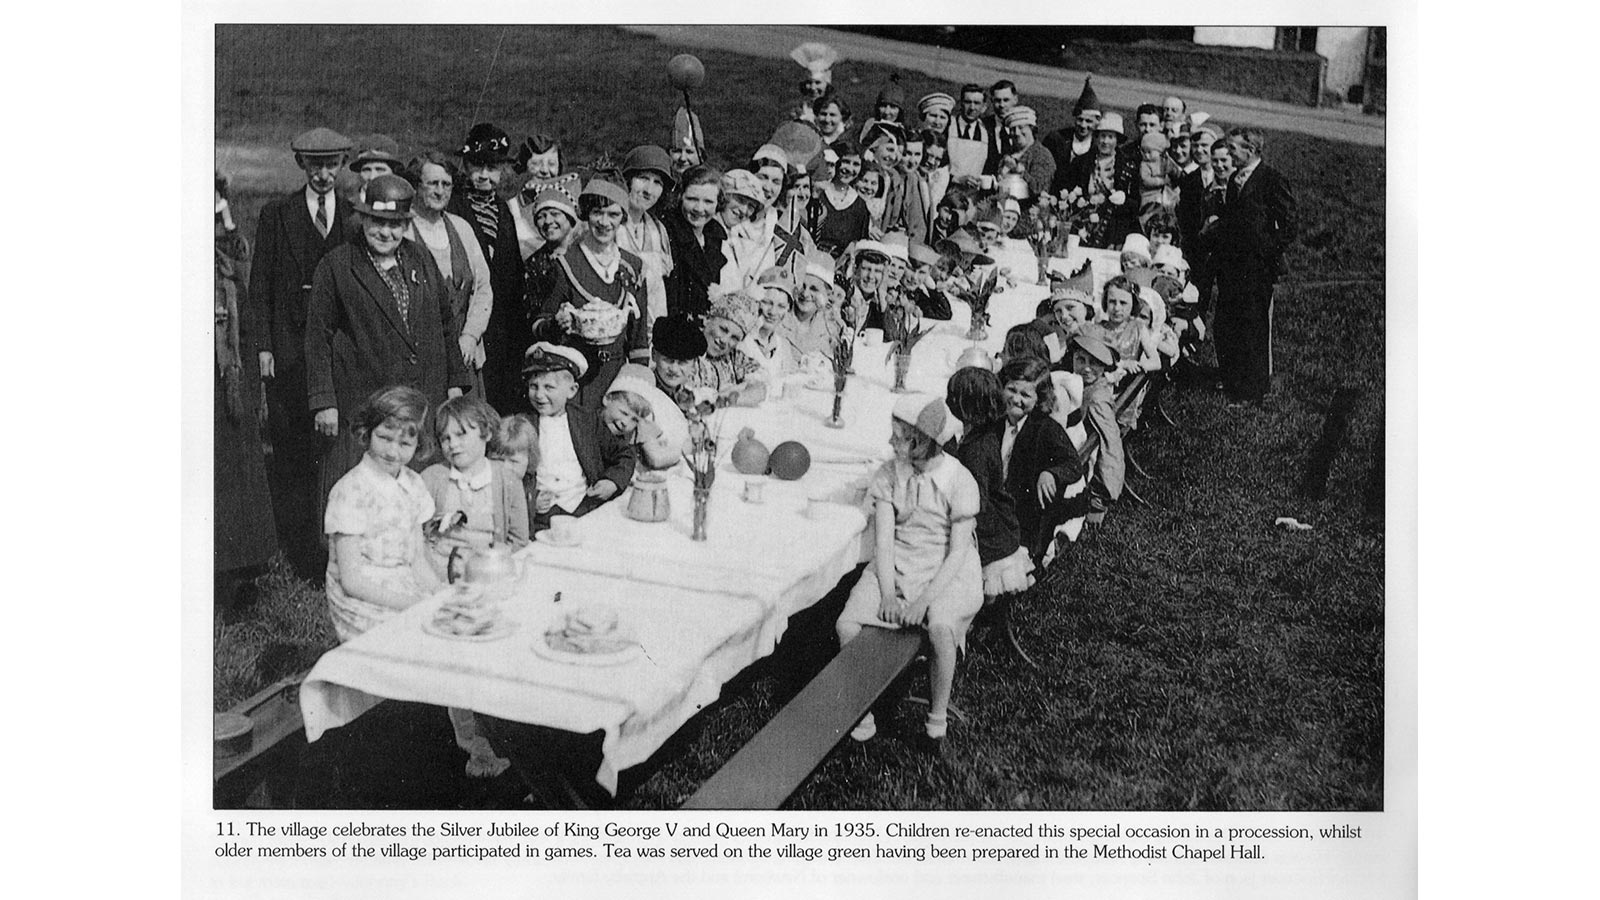 image of Silver Jubilee celebrations of King George V and Queen Mary on Walbottle Village Green - 1935